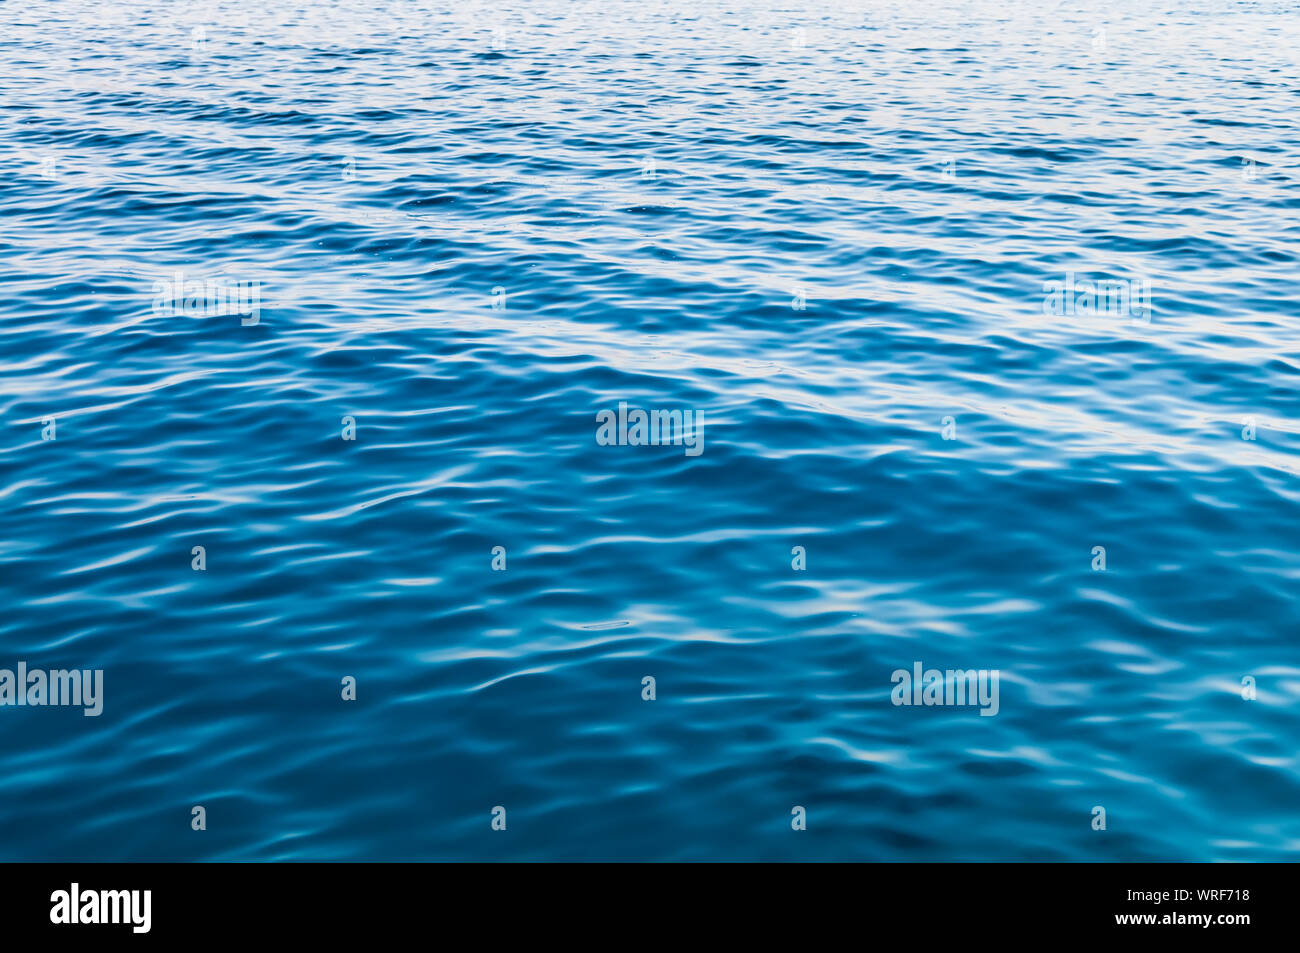 Sea water surface with small waves. Abstract water background Stock Photo